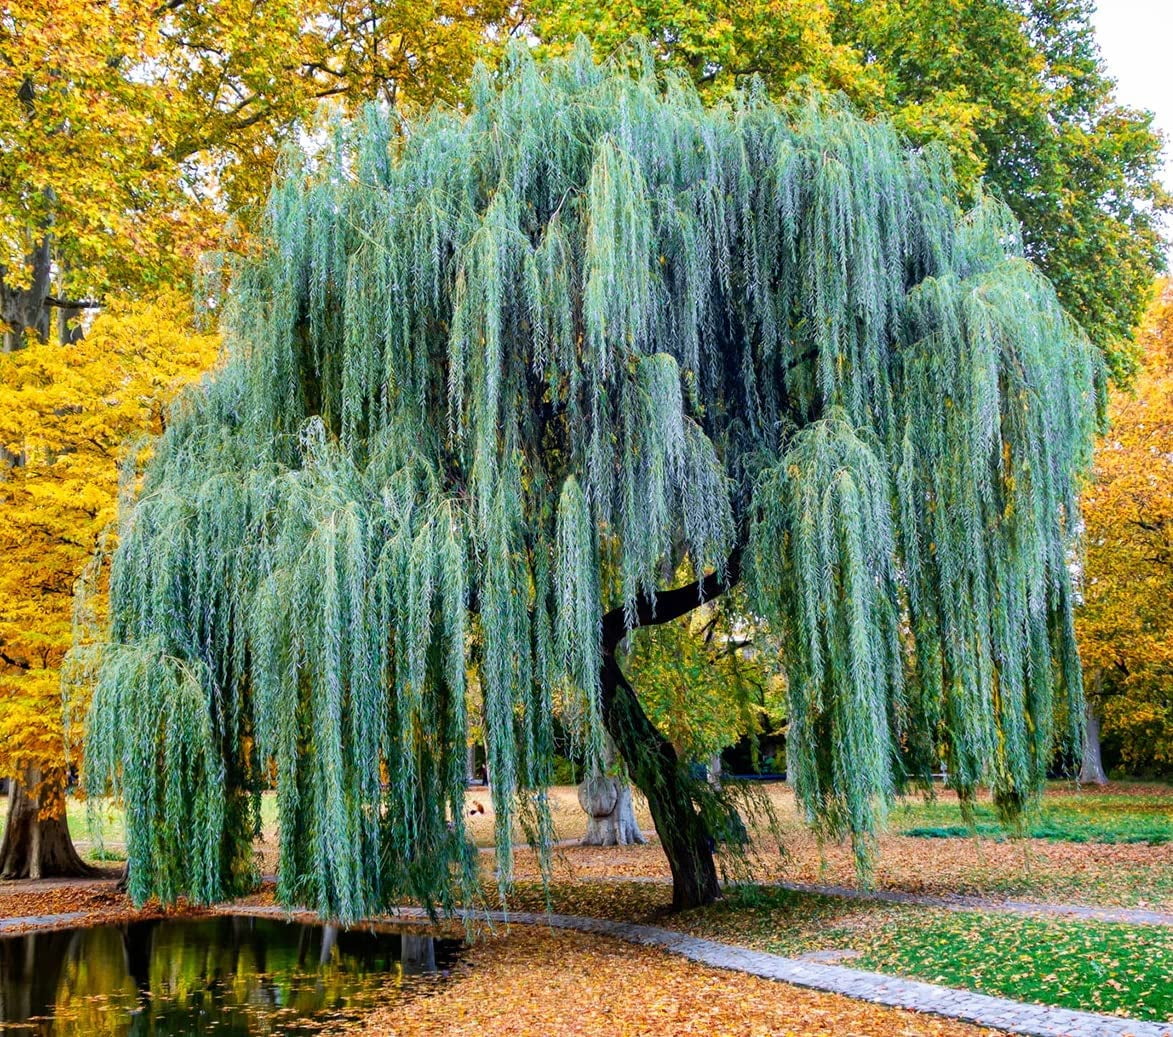 Weeping Willow Tree Cuttings to Plant - Fast Growing Trees - Beautiful  Arching Canopy - Popular asBonsai (2 Weeping Willows)